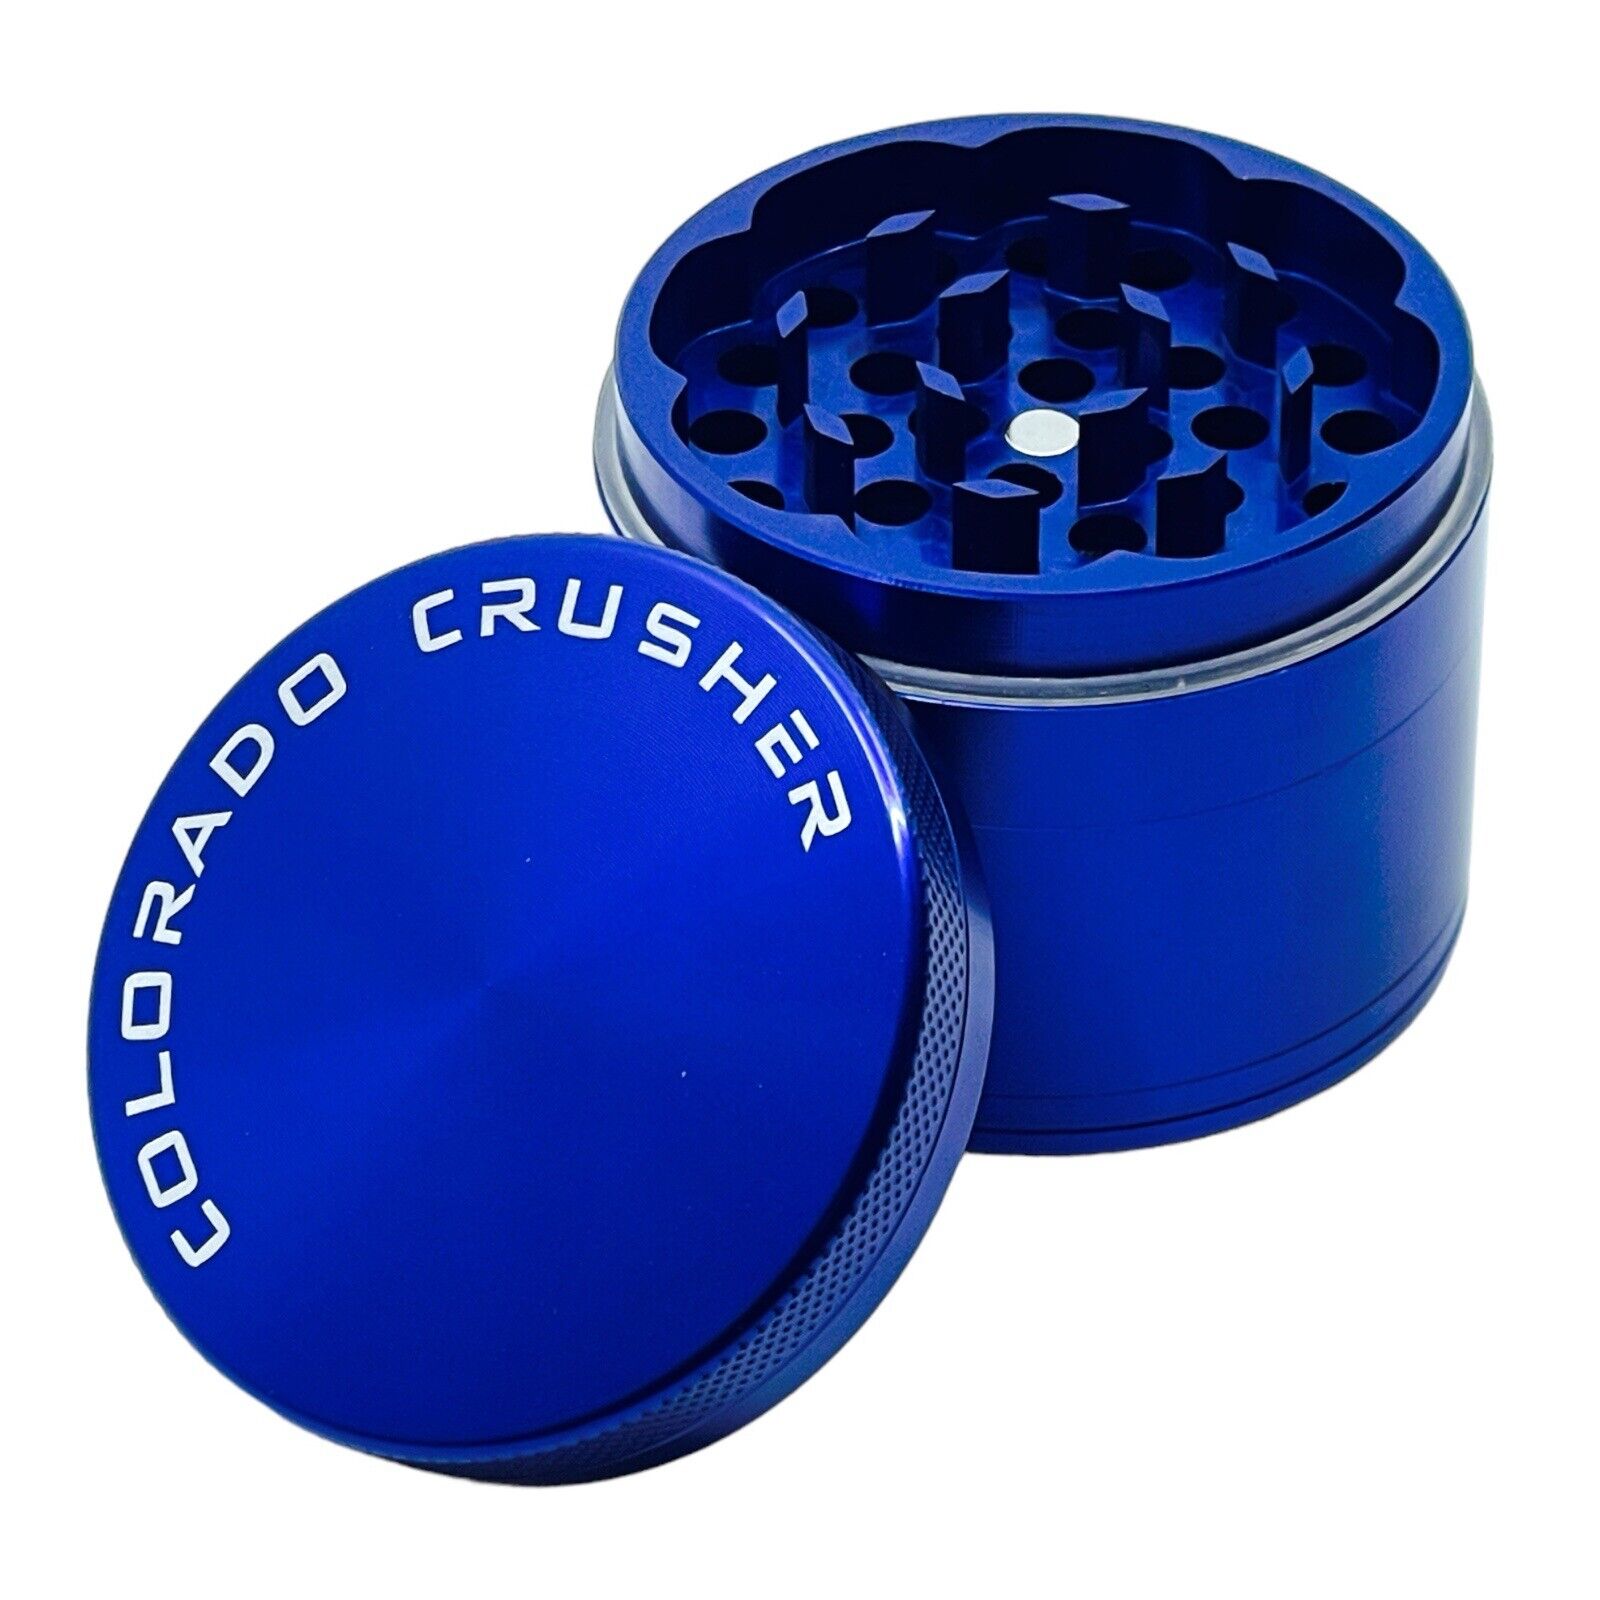 Colorado Crusher 56 MM Tall Herb Grinder Spice Crusher 4 Piece Blue